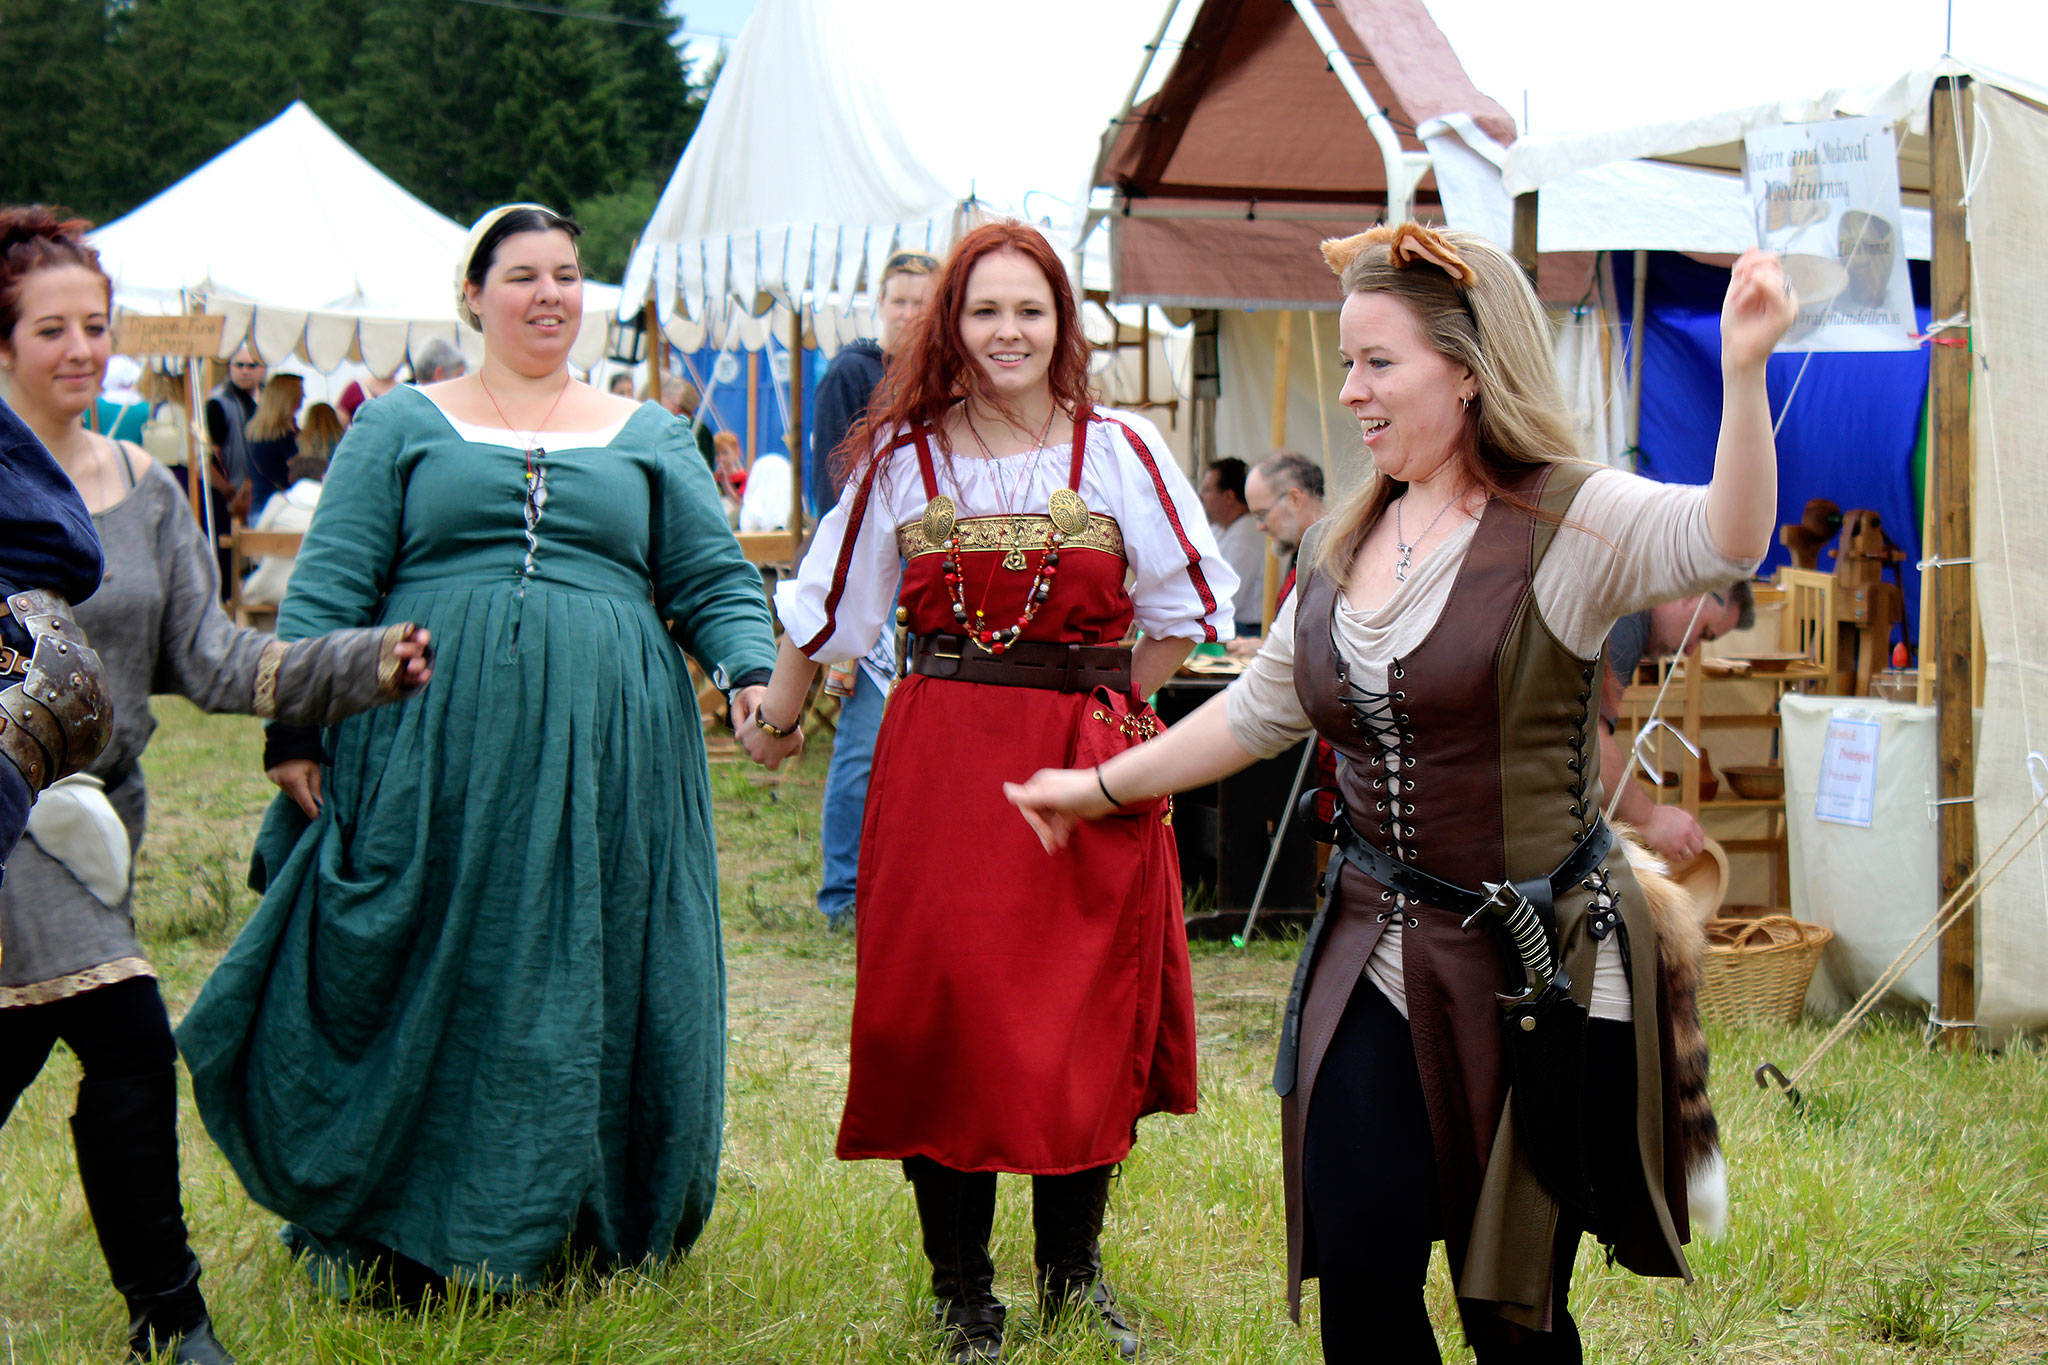 The Artisan Village at the Kitsap Medieval Faire will have demonstrations such as music and dance, as well as culinary, smithing, wood craft and more.                                Michelle Beahm / Kitsap News Group